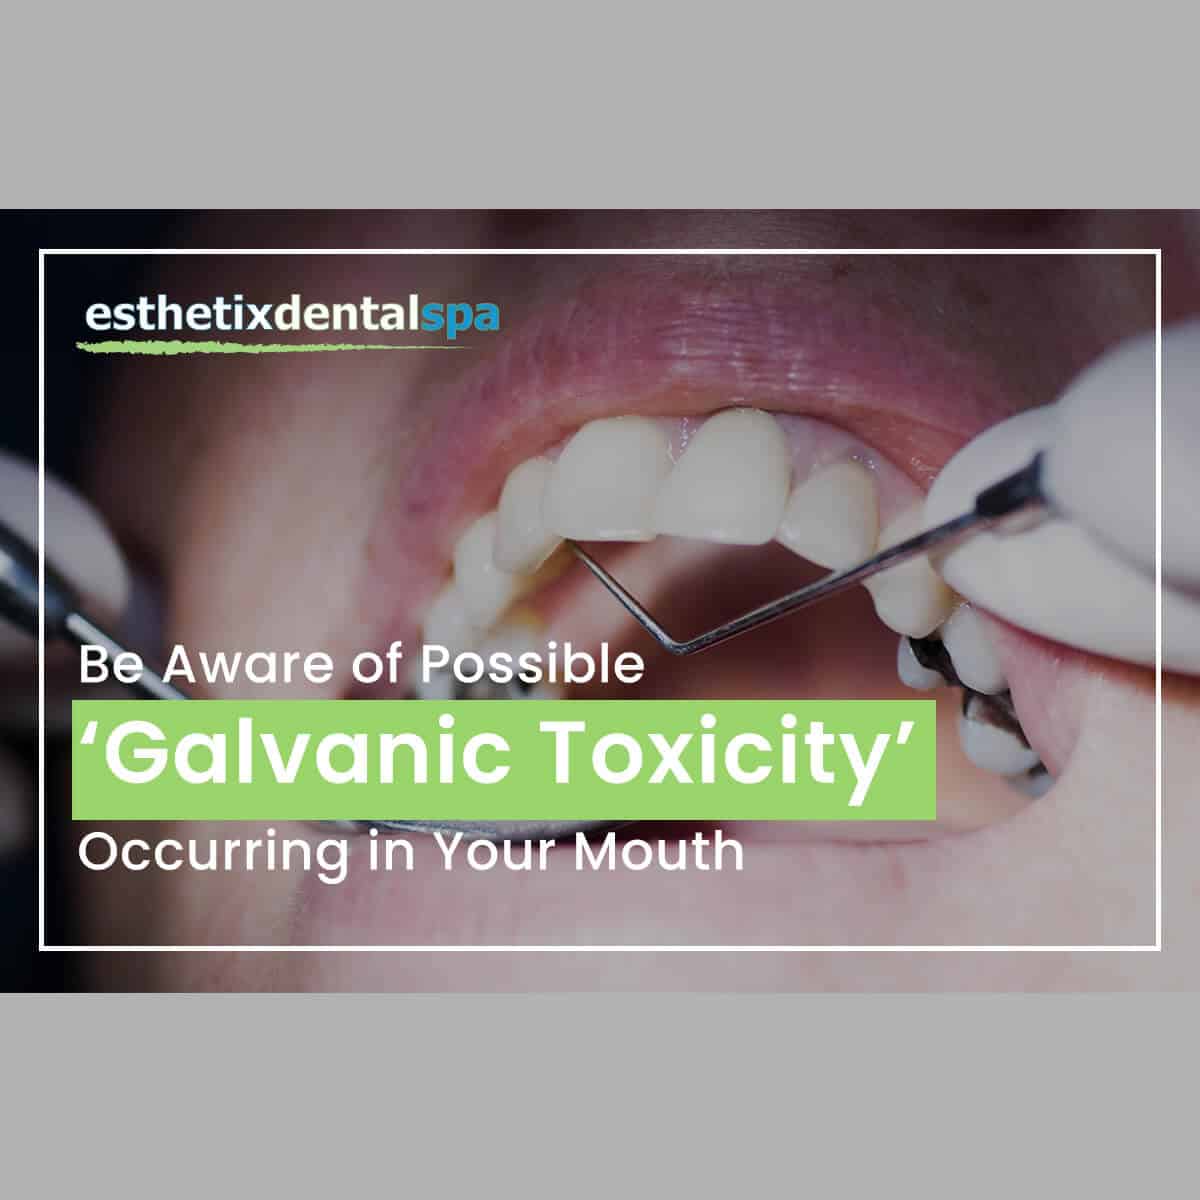 Be Aware Of Possible 'Galvanic Toxicity' Ocurring In Your Mouth